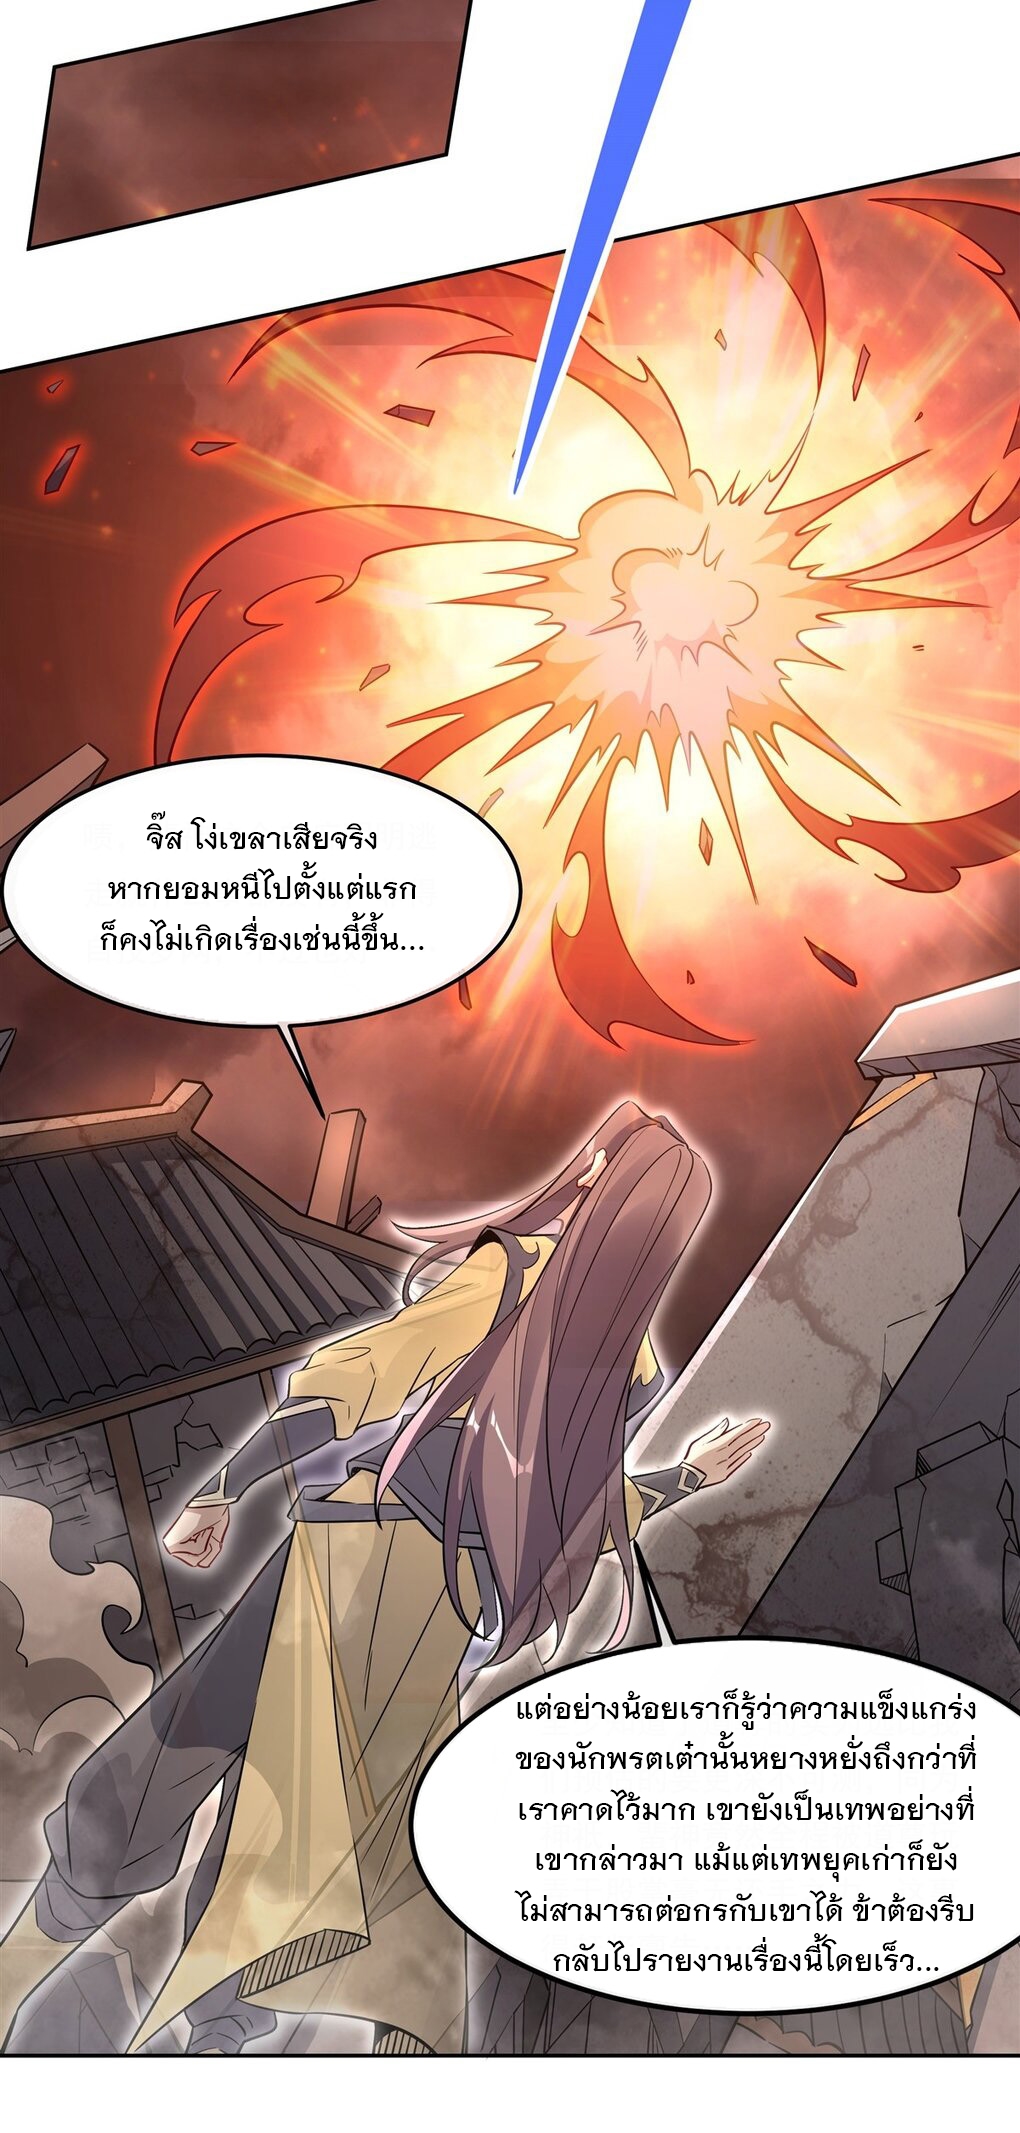 My Female Apprentices Are All Big Shots From the Future Ã Â¸â€¢Ã Â¸Â­Ã Â¸â„¢Ã Â¸â€”Ã Â¸ÂµÃ Â¹Ë† 100 (26)